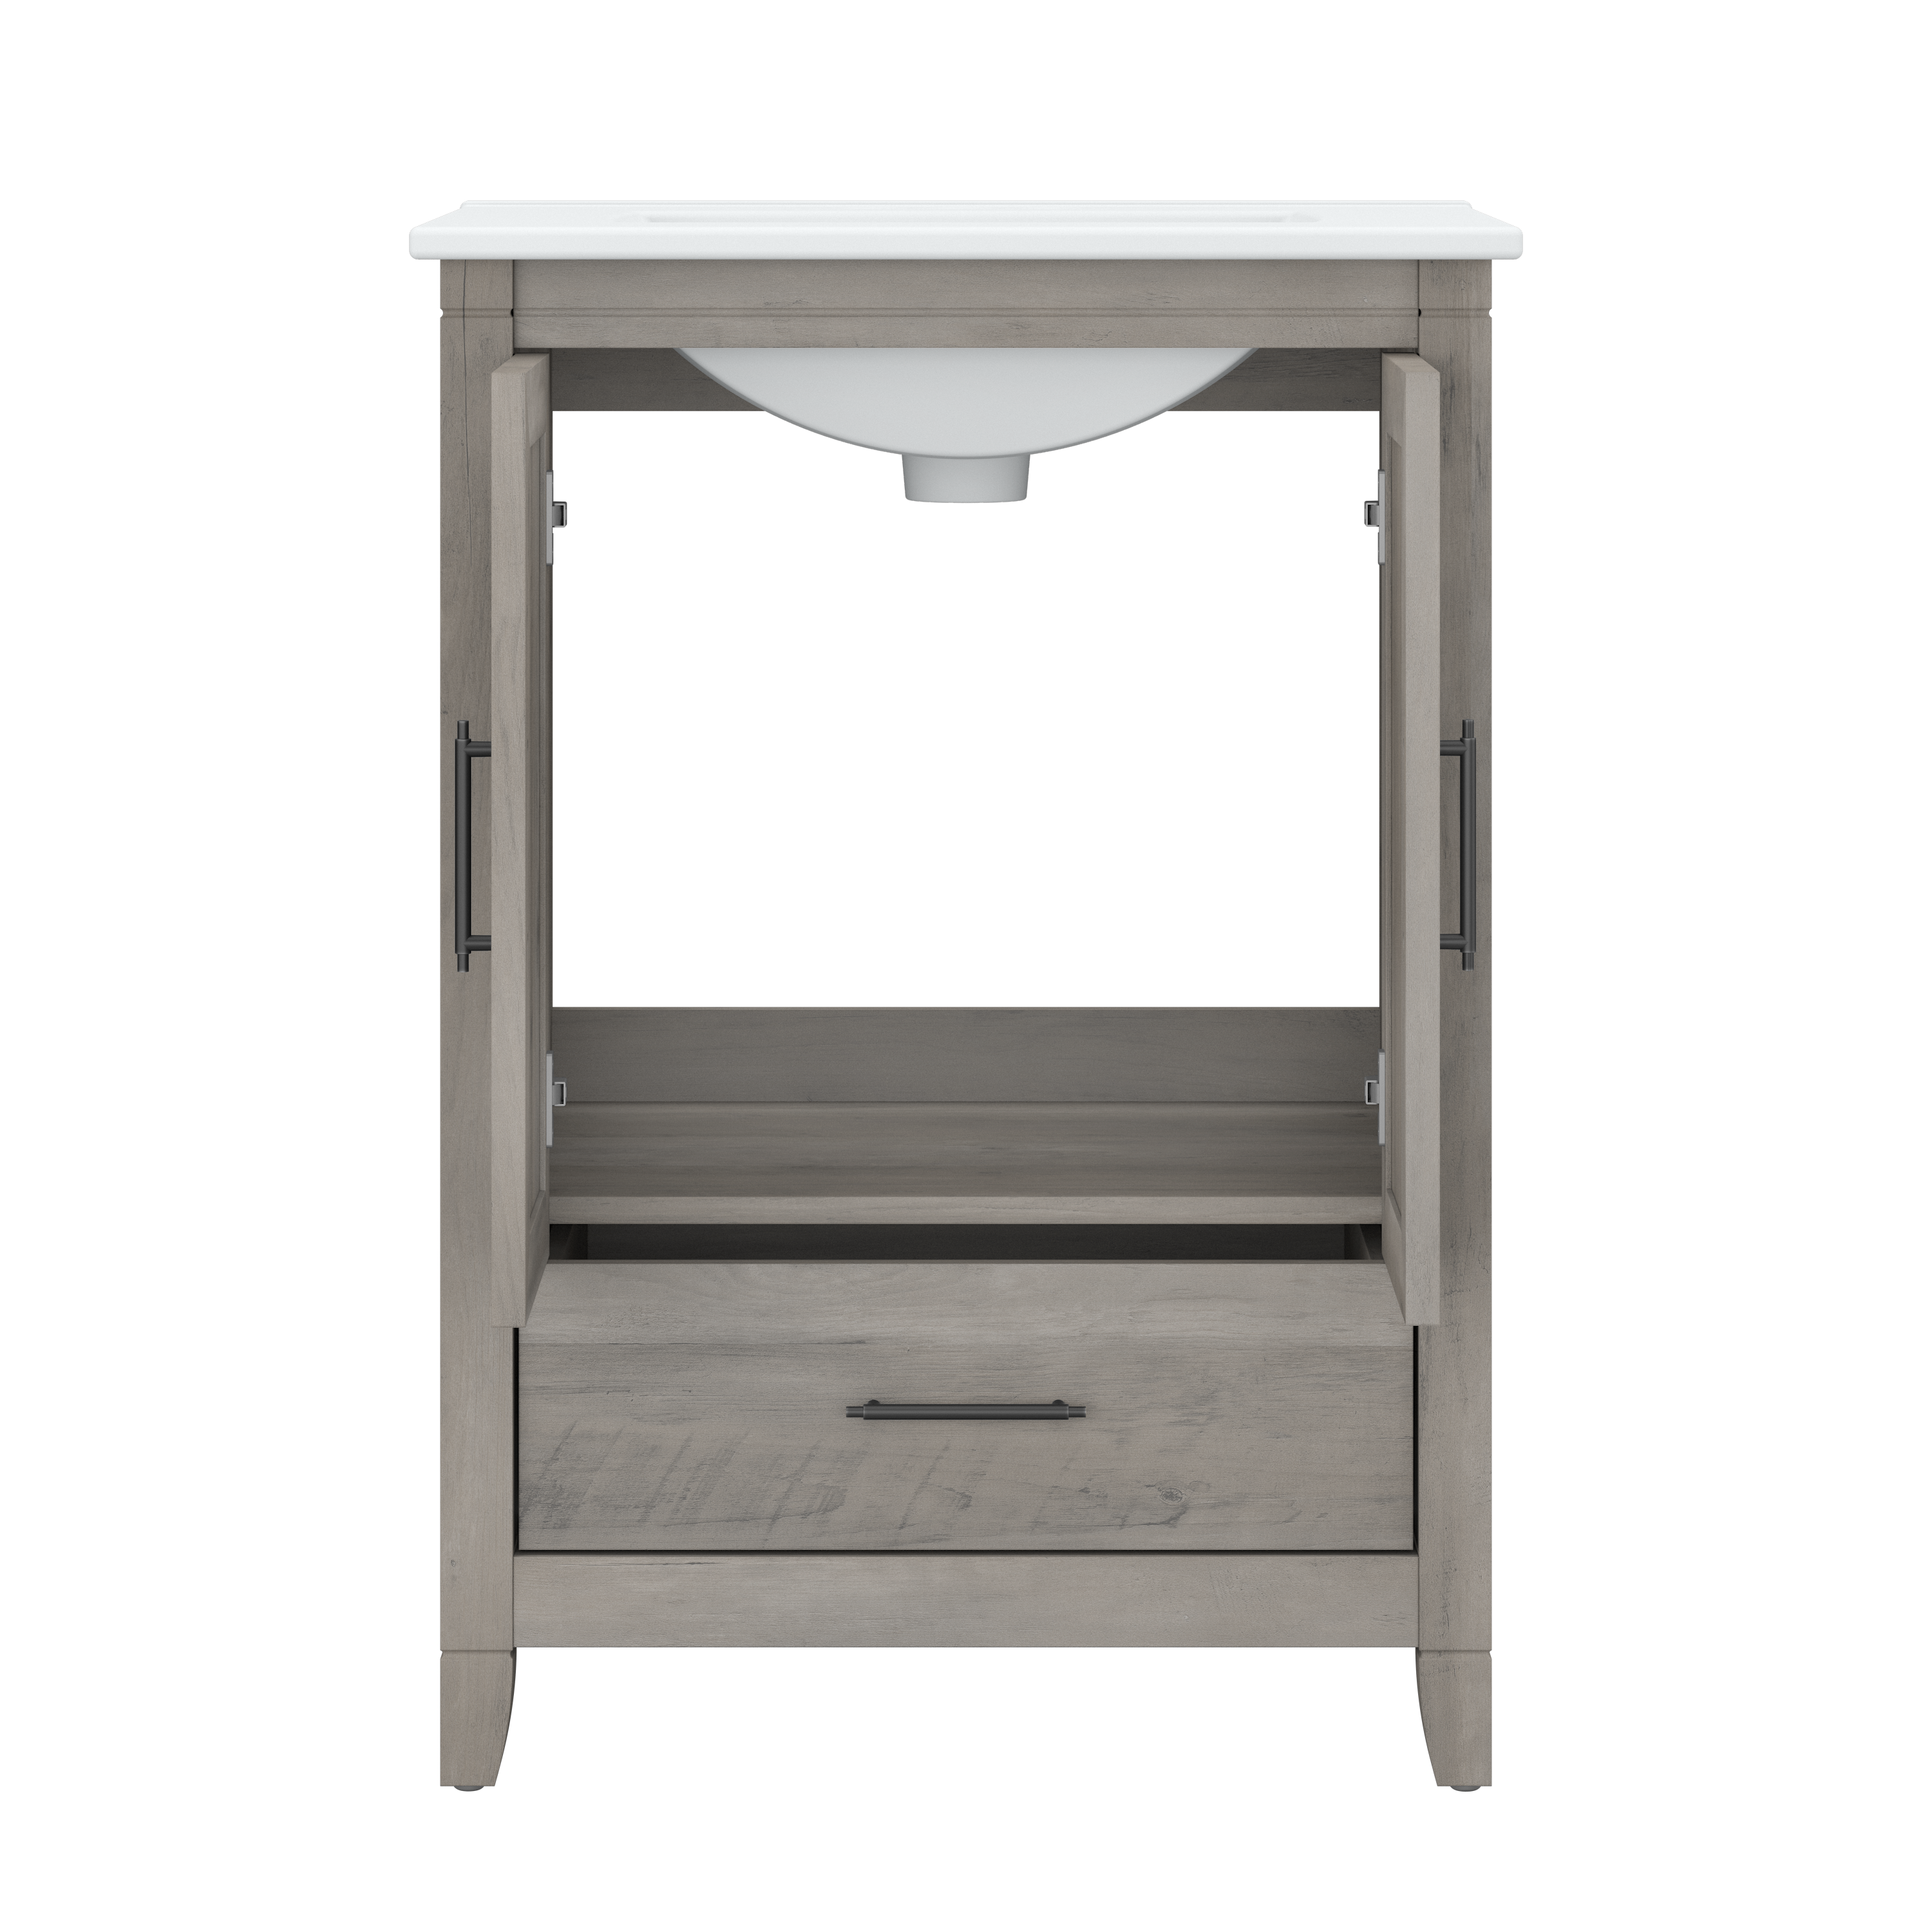 Shop Bush Furniture Key West 64W Double Vanity Set with Sinks, Medicine Cabinets and Linen Tower 05 KWS044DG #color_driftwood gray